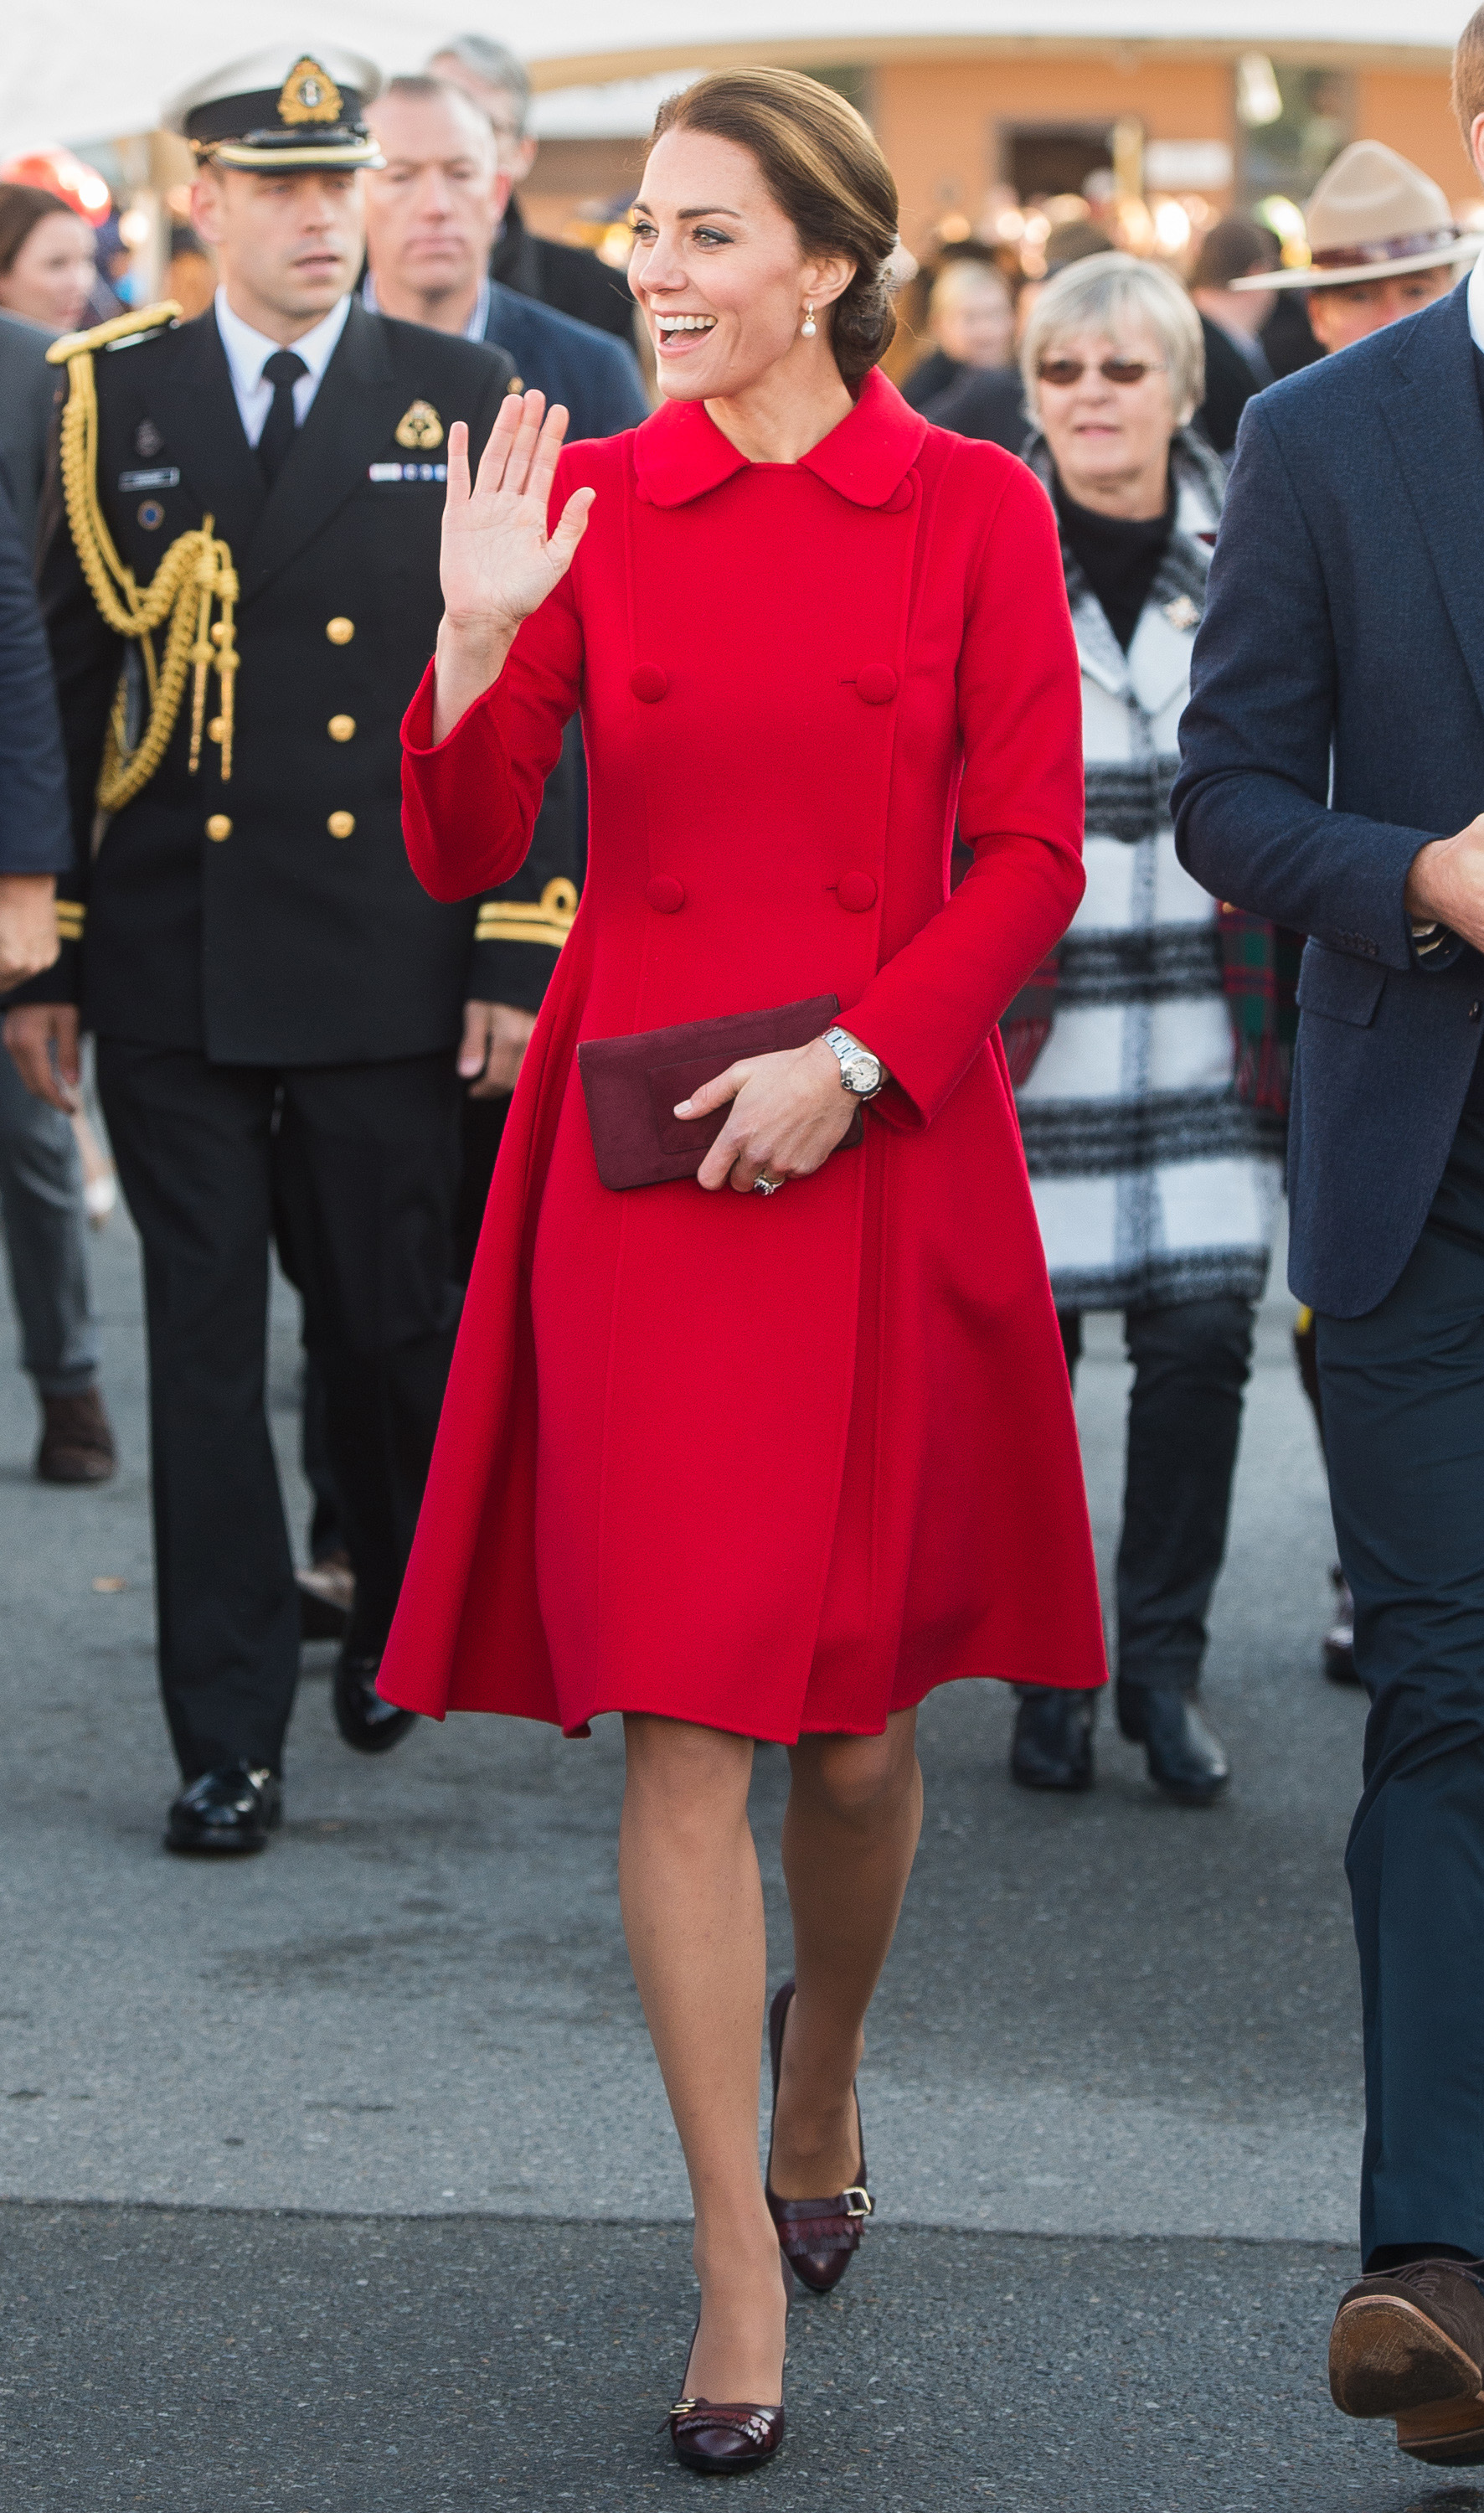 Catherine, Duchess of Cambridge, tours the Main Street Party in Whitehorse, Canada, on Sept. 28, 2016.